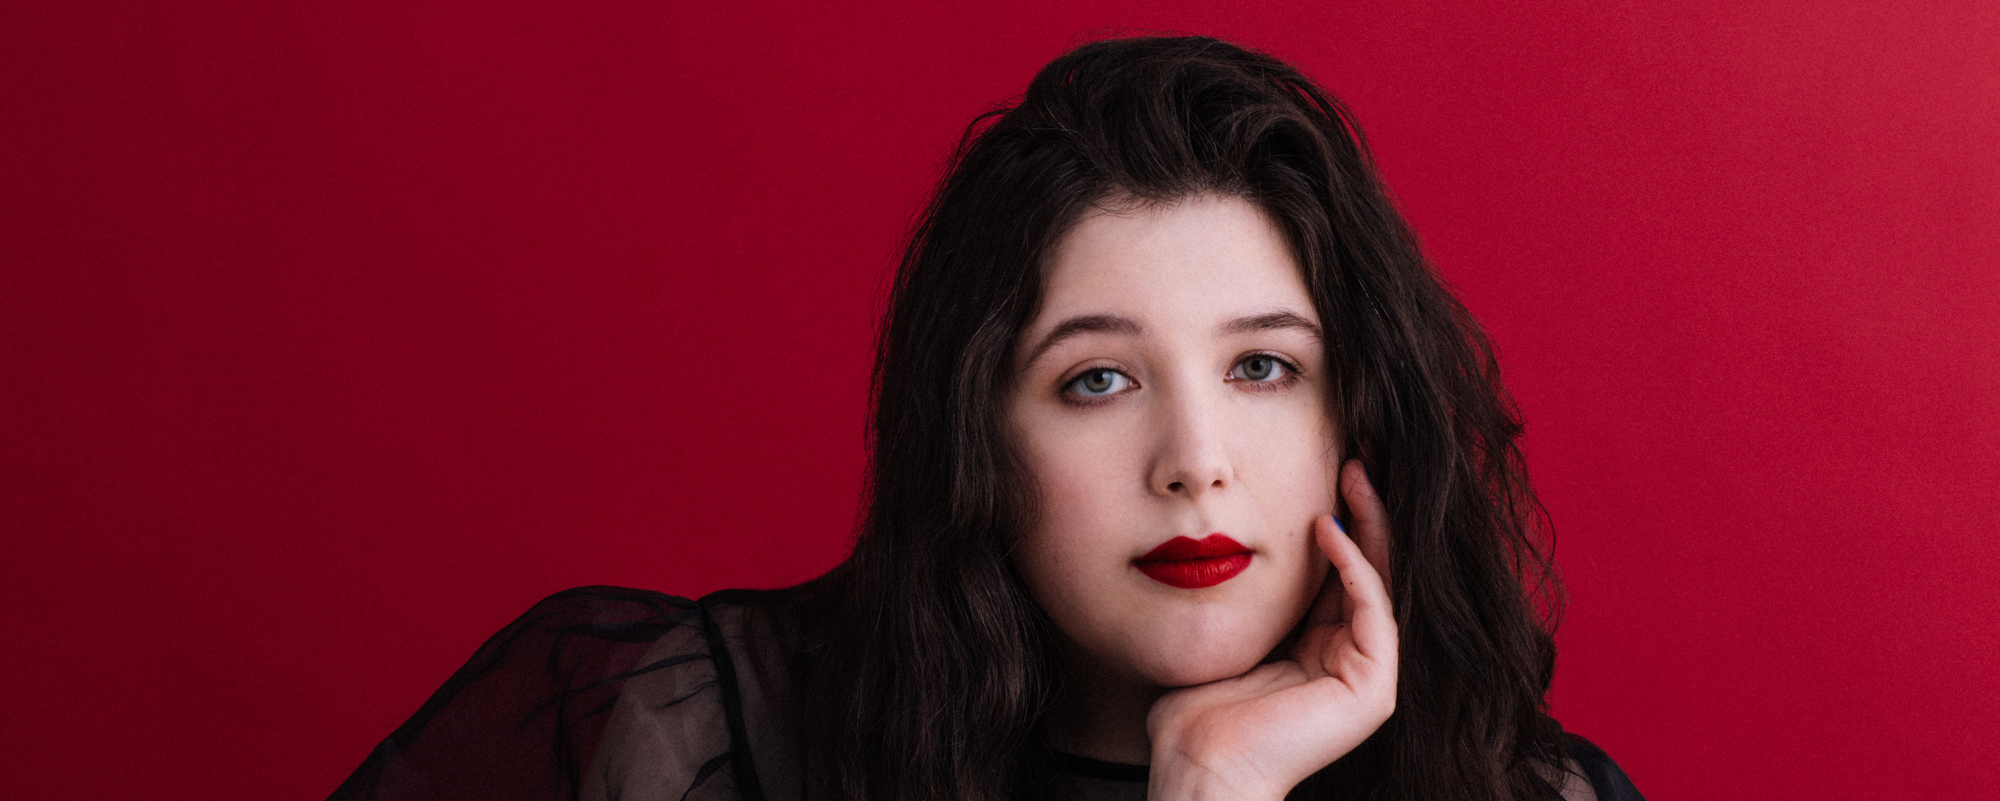 Lucy Dacus: Closing the Chapter of Childhood